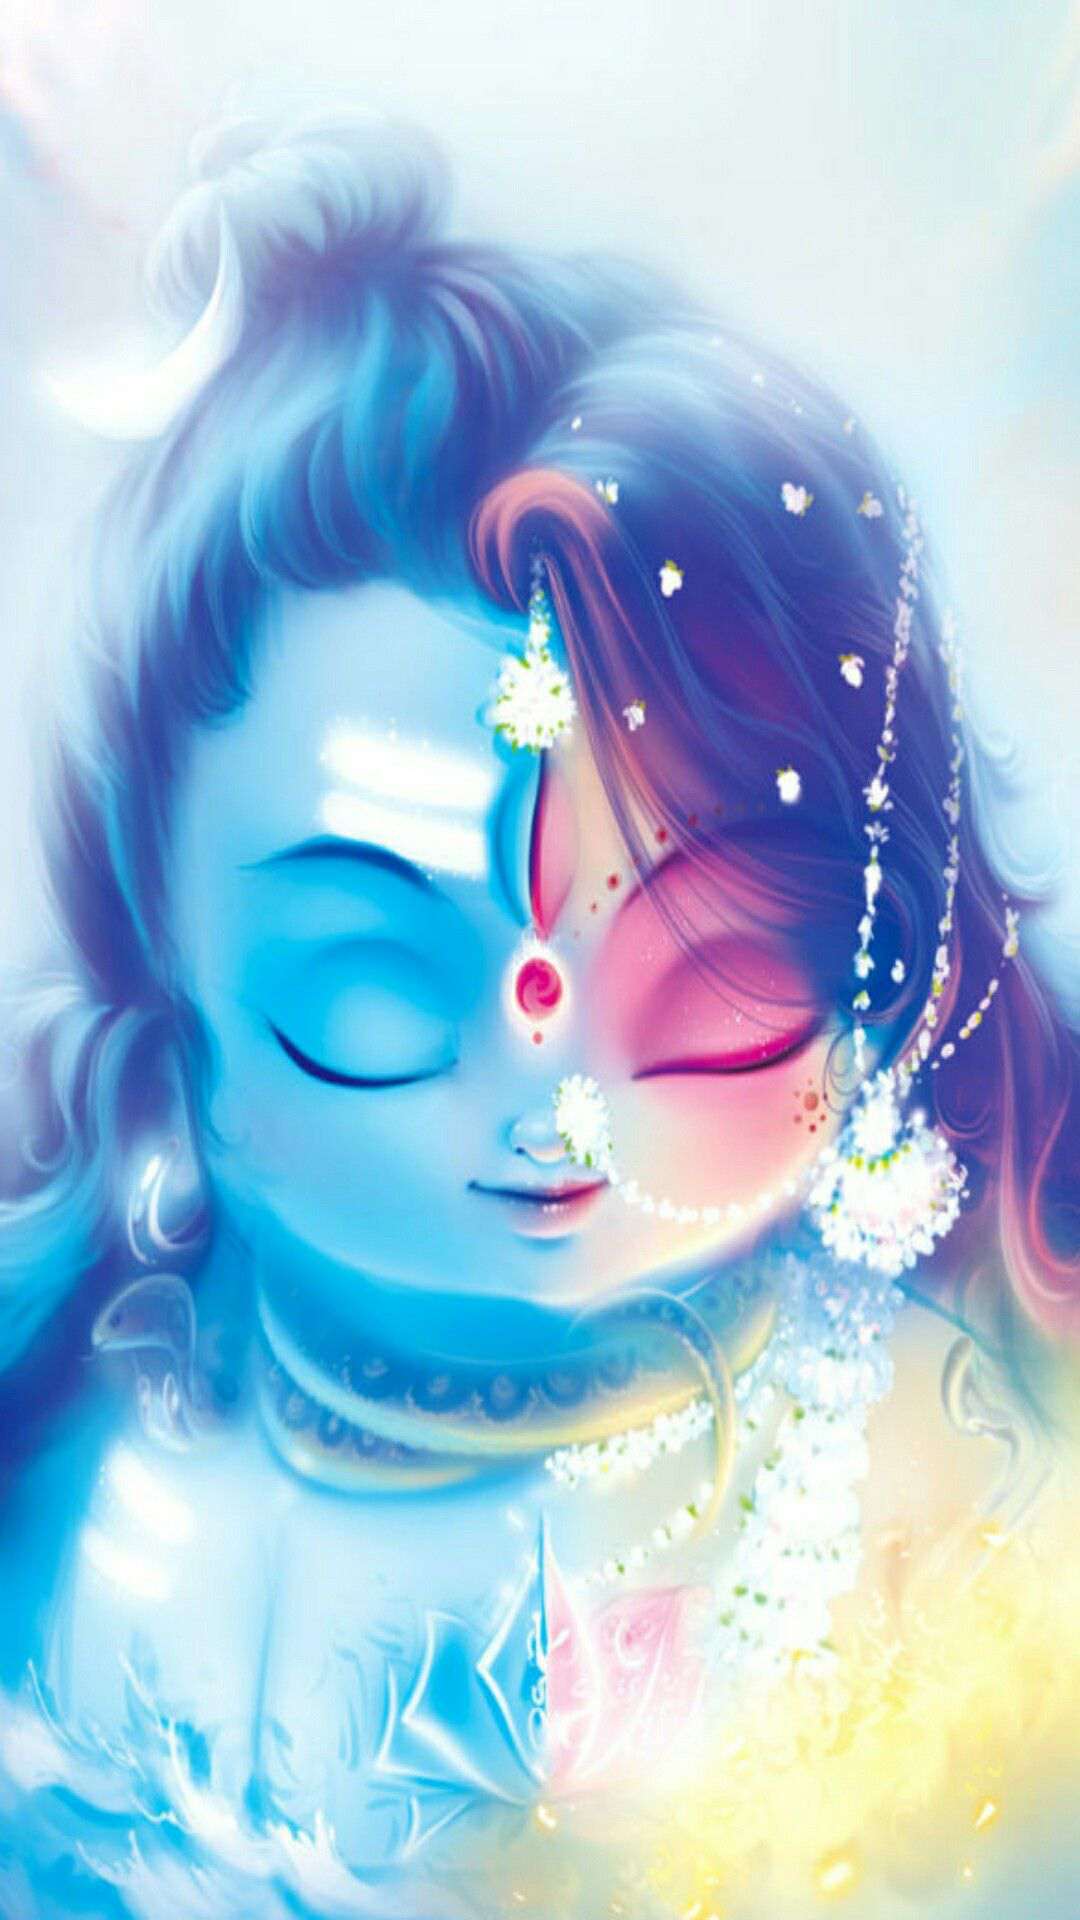 The Divine couple Lord Shiva and Parvati in creative art painting wallpaper   Lord shiva painting Pictures of shiva Shiva art